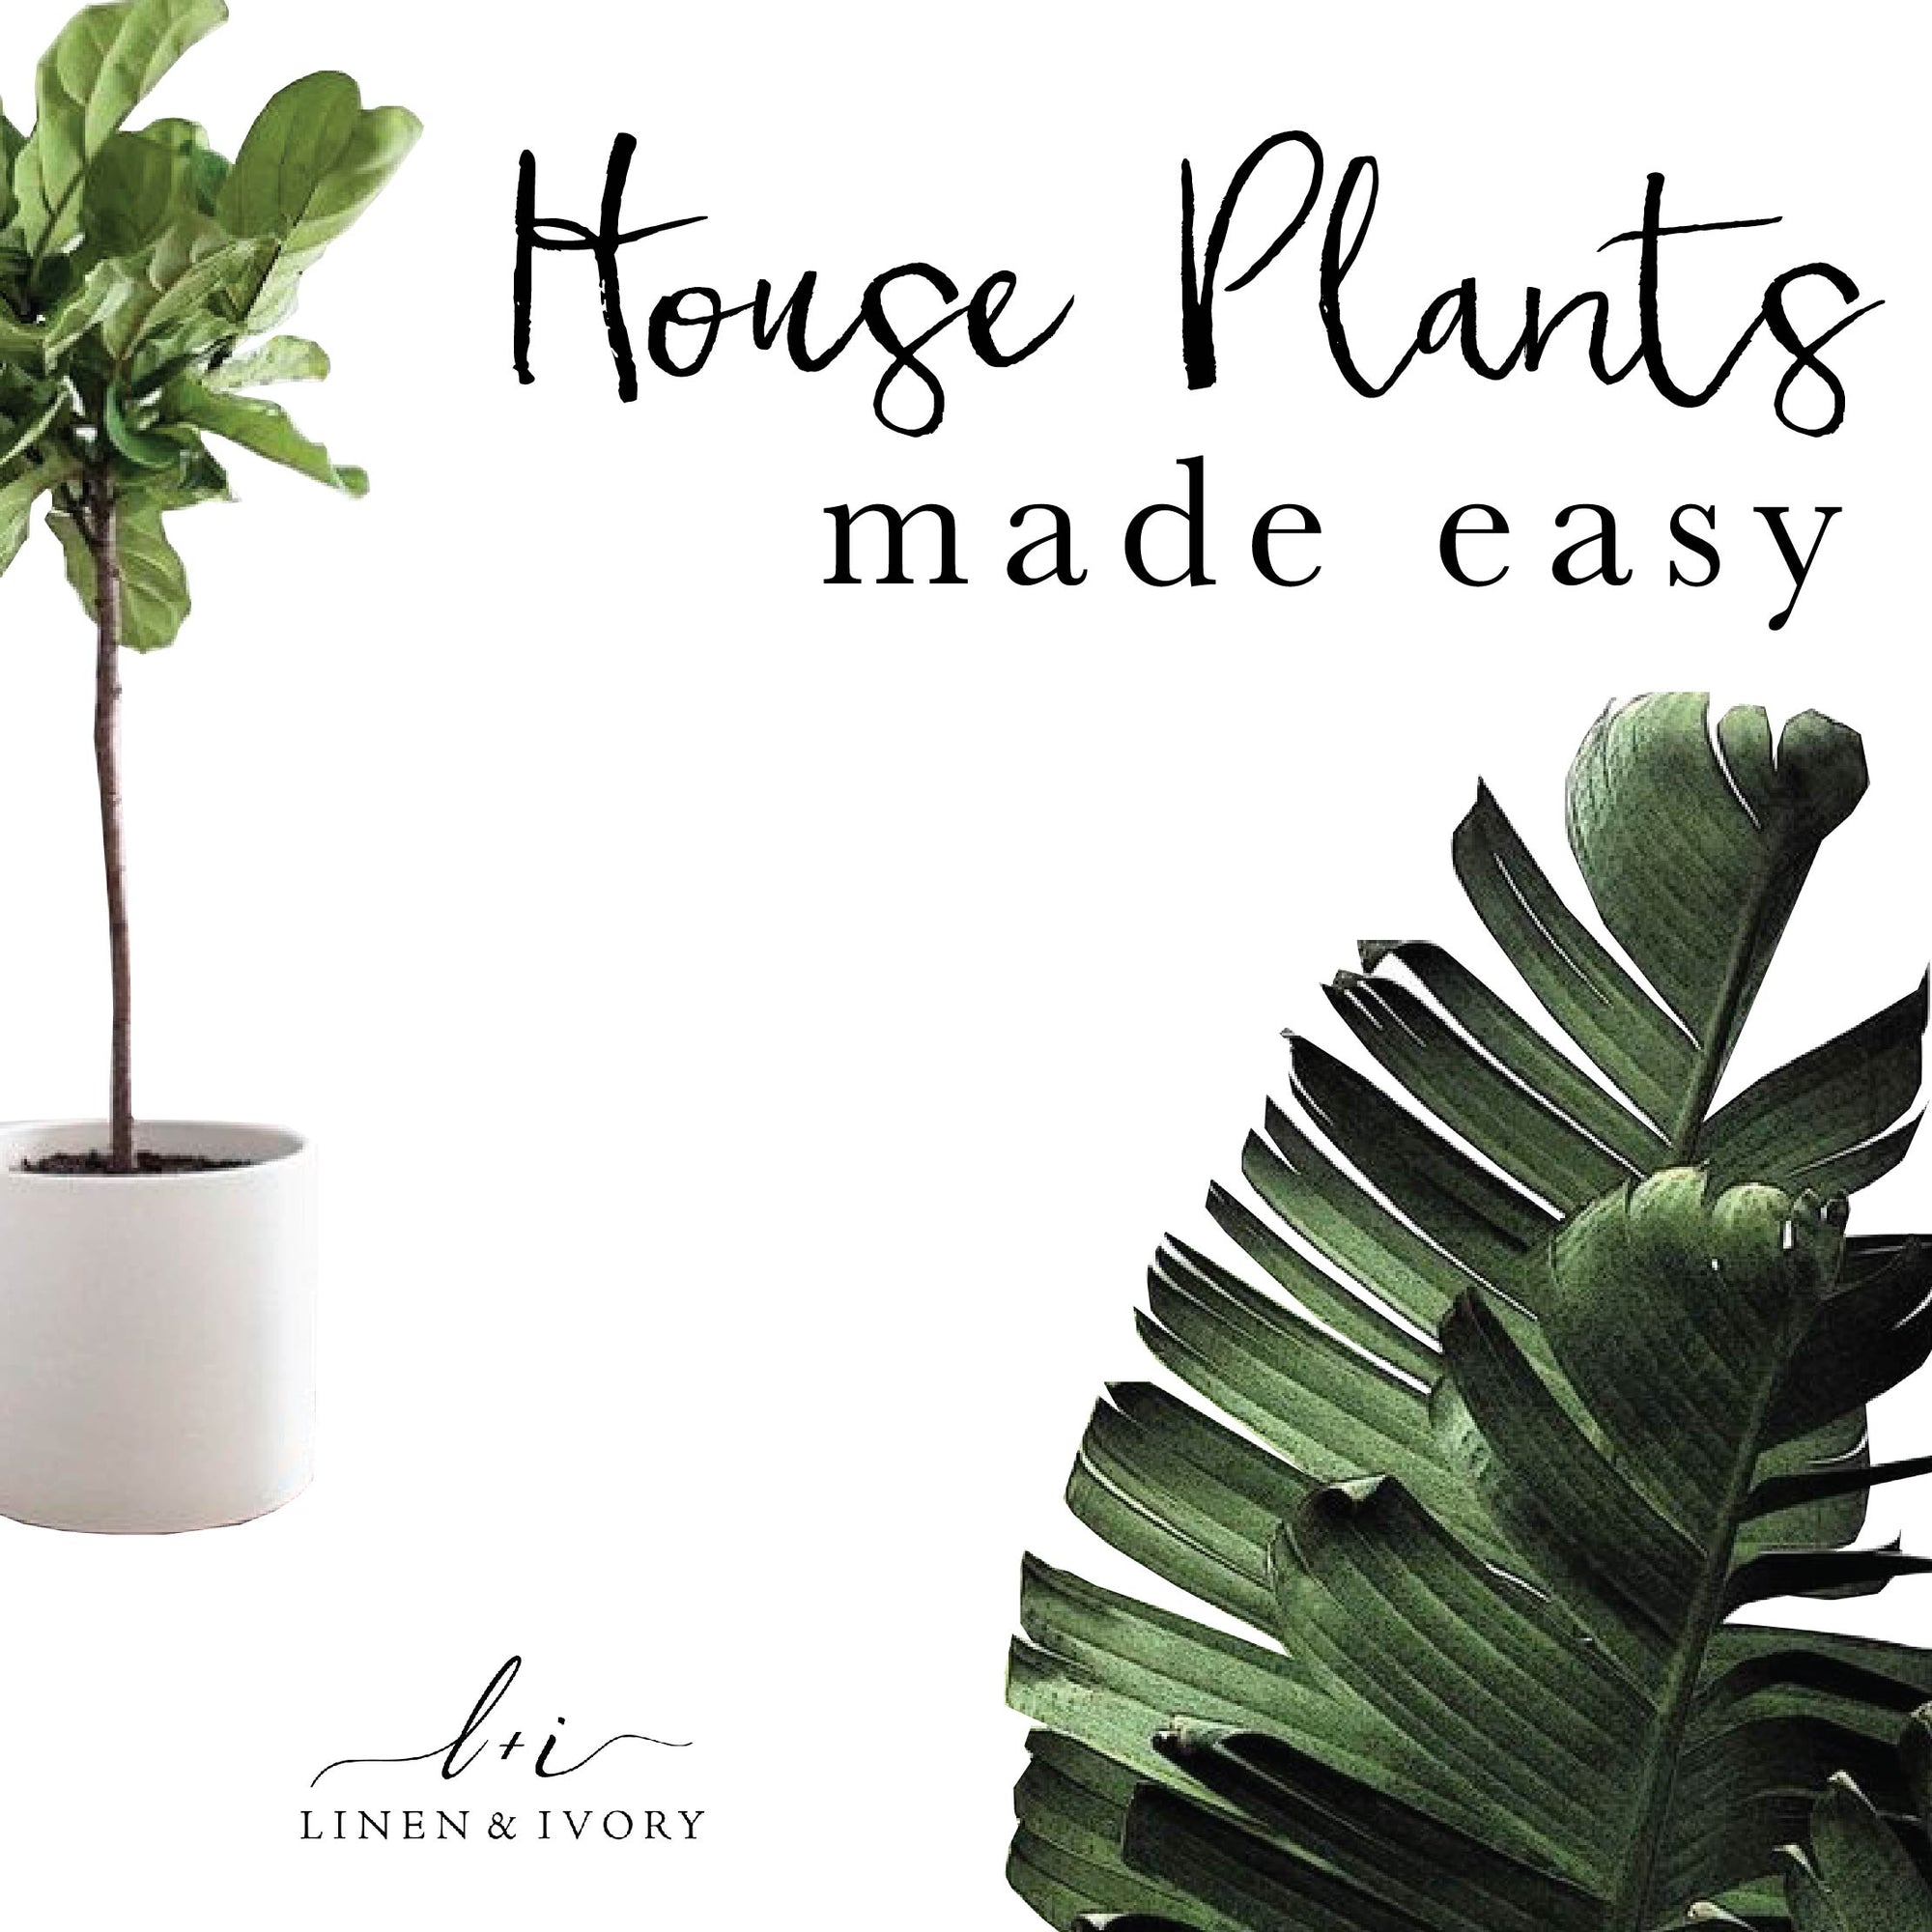 House Plants Made Easy